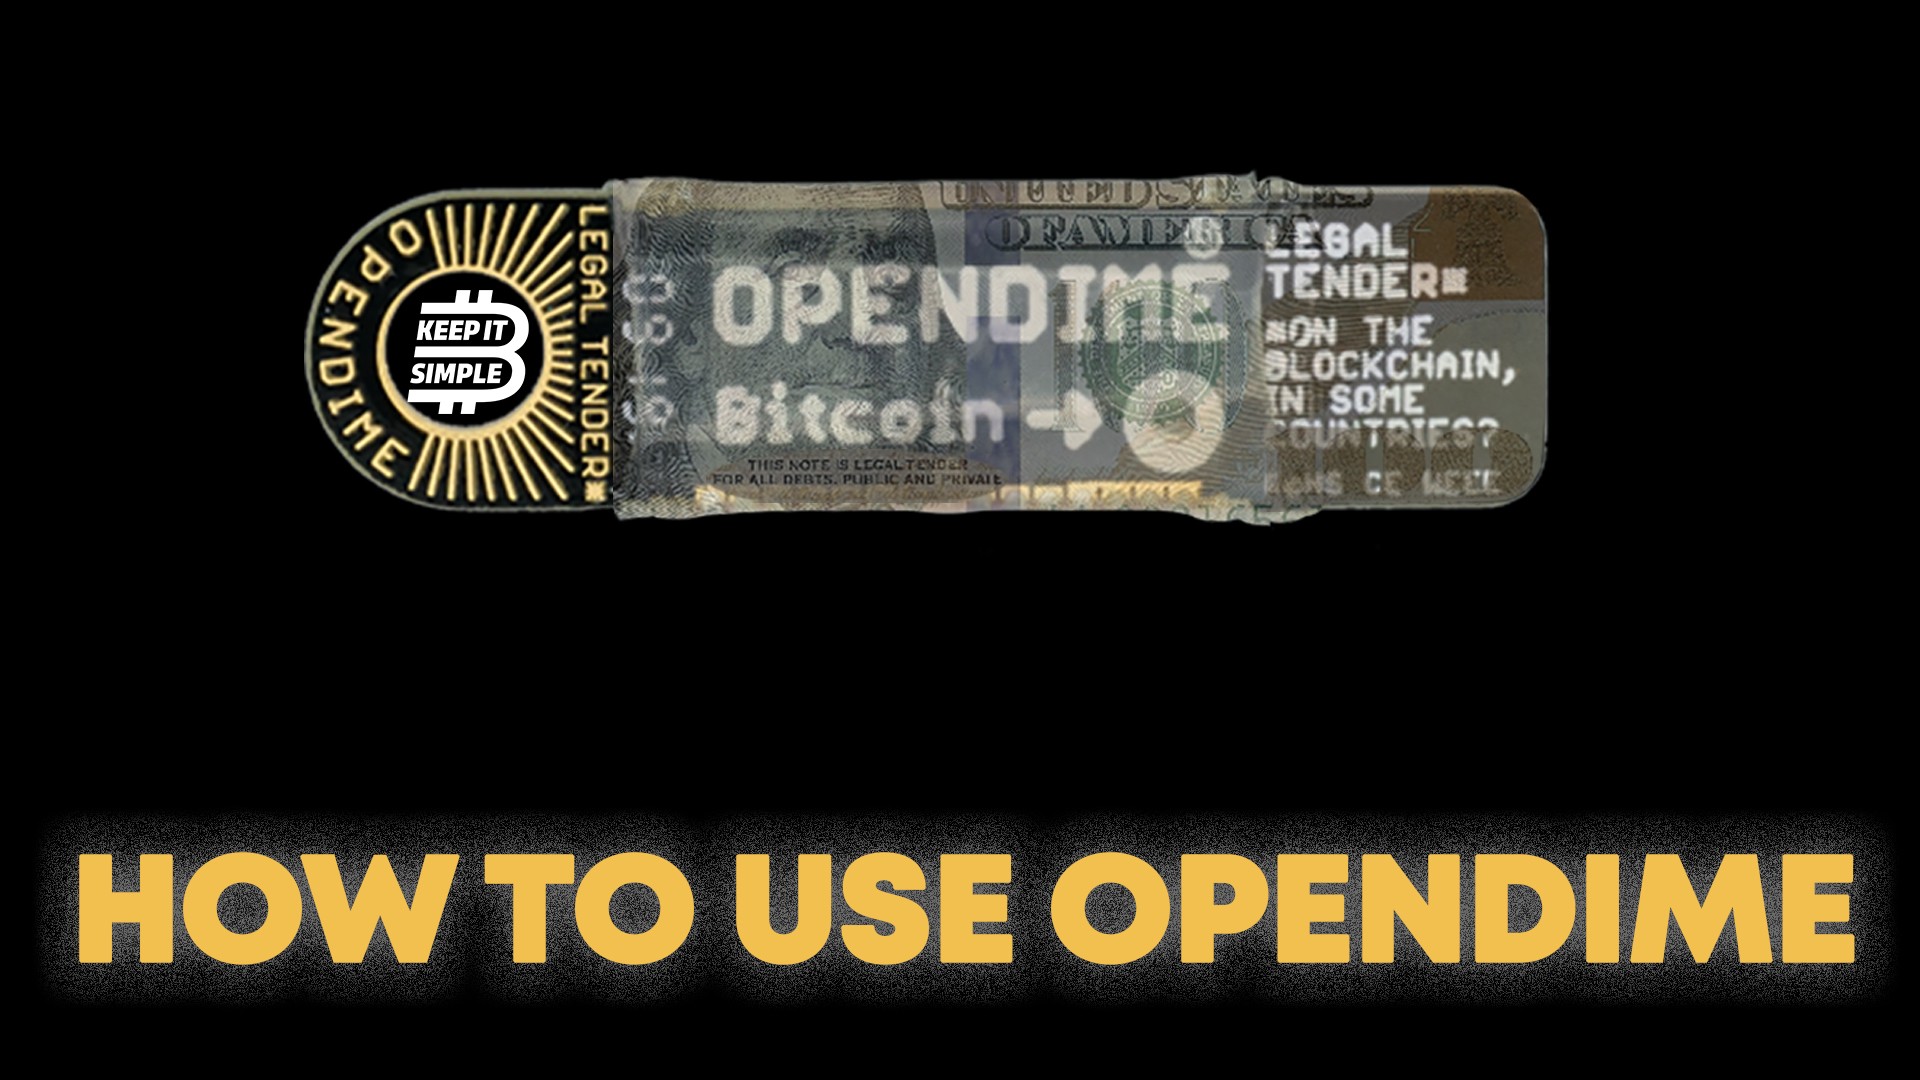 OPENDIME: Physical instantiation of Bitcoin